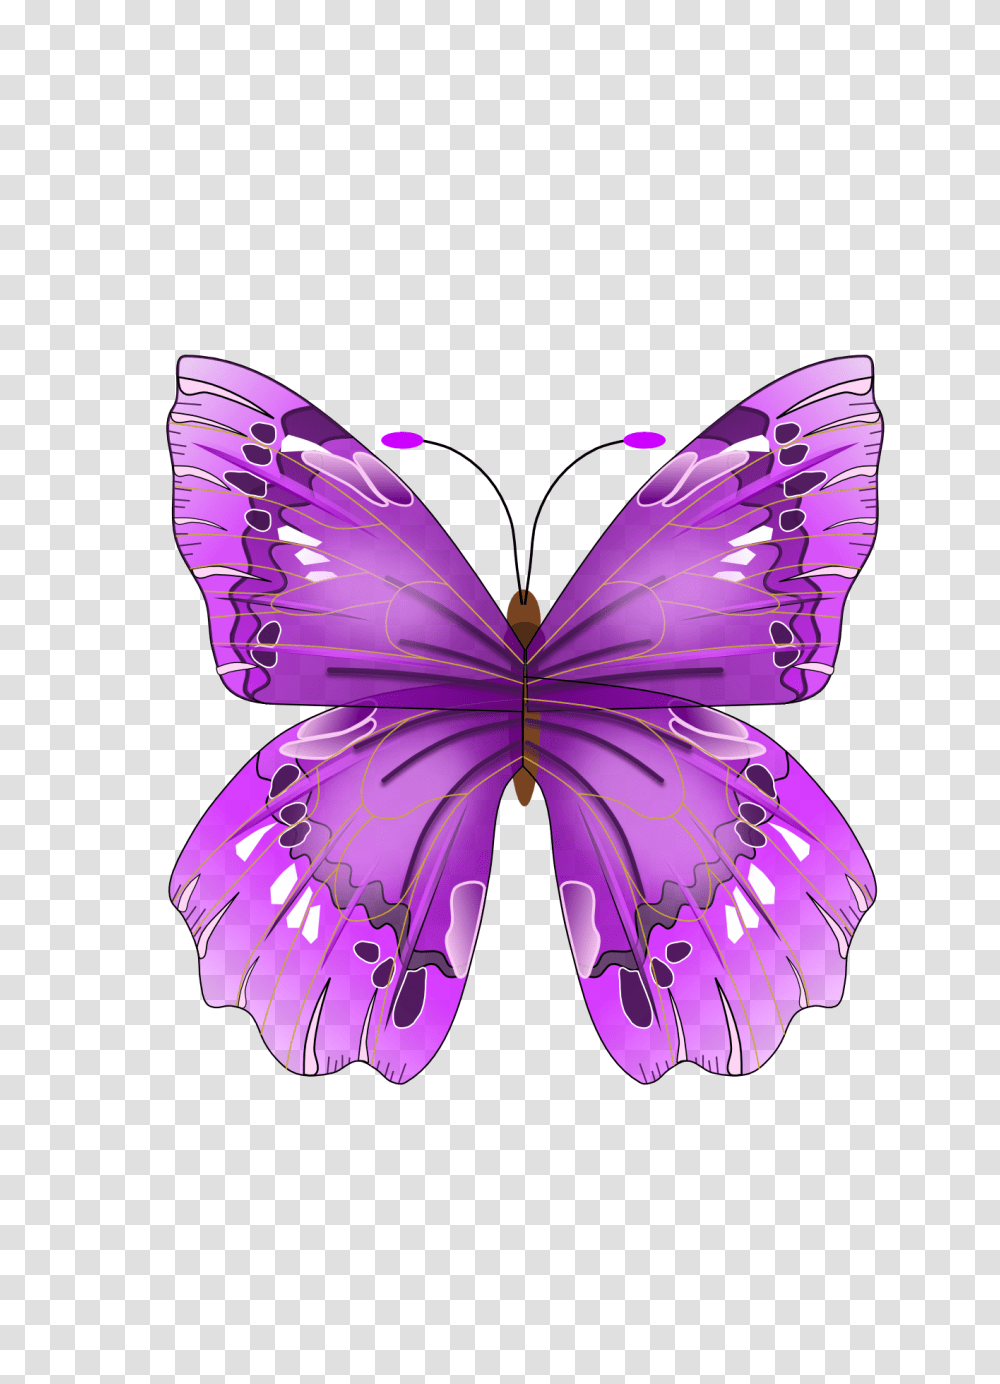 Butterfly, Insect, Purple, Ornament, Light Transparent Png